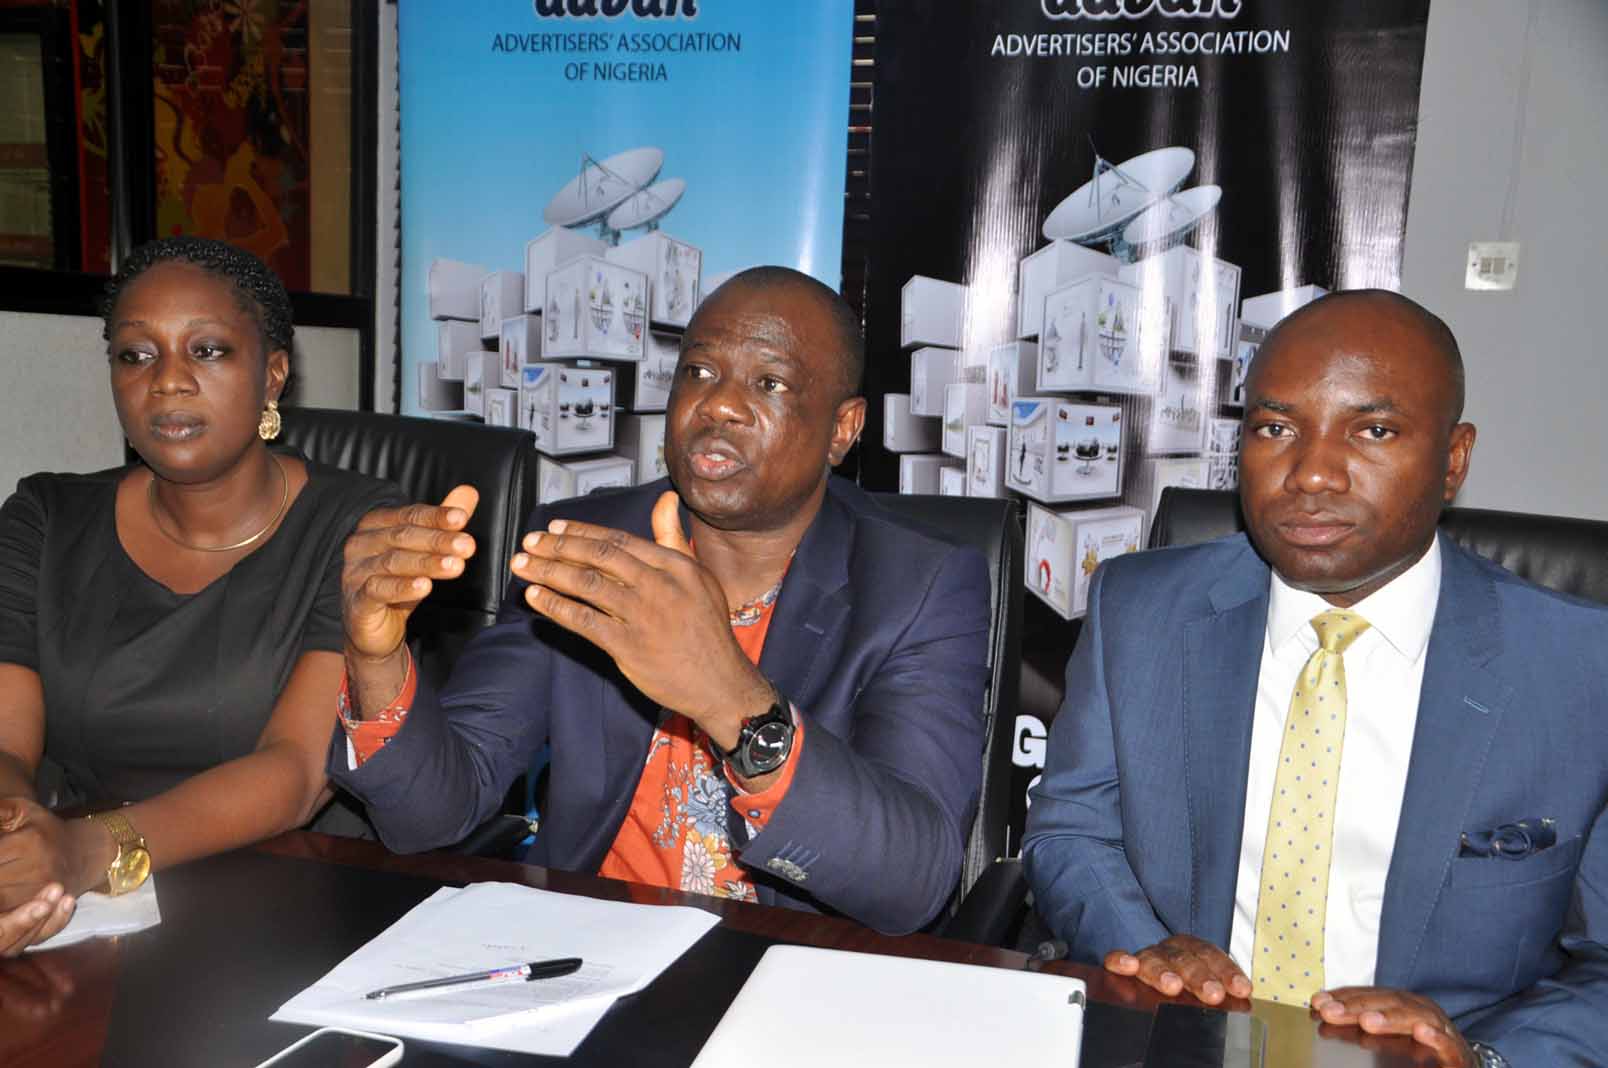 From Left;Mrs Ediri Ose-Ediale;Executive Secretary Advertiser Association of Nigeria[ADVAN]Mr David Okeme,Presisdent and Mr Sampson Oloche,Publicity Secretary all of Advan.At the press briefing on Advan Marketers Conference 2016 held in Lagos on Tuesday 26/04/2016.PHOTO BY AKEEM SALAU